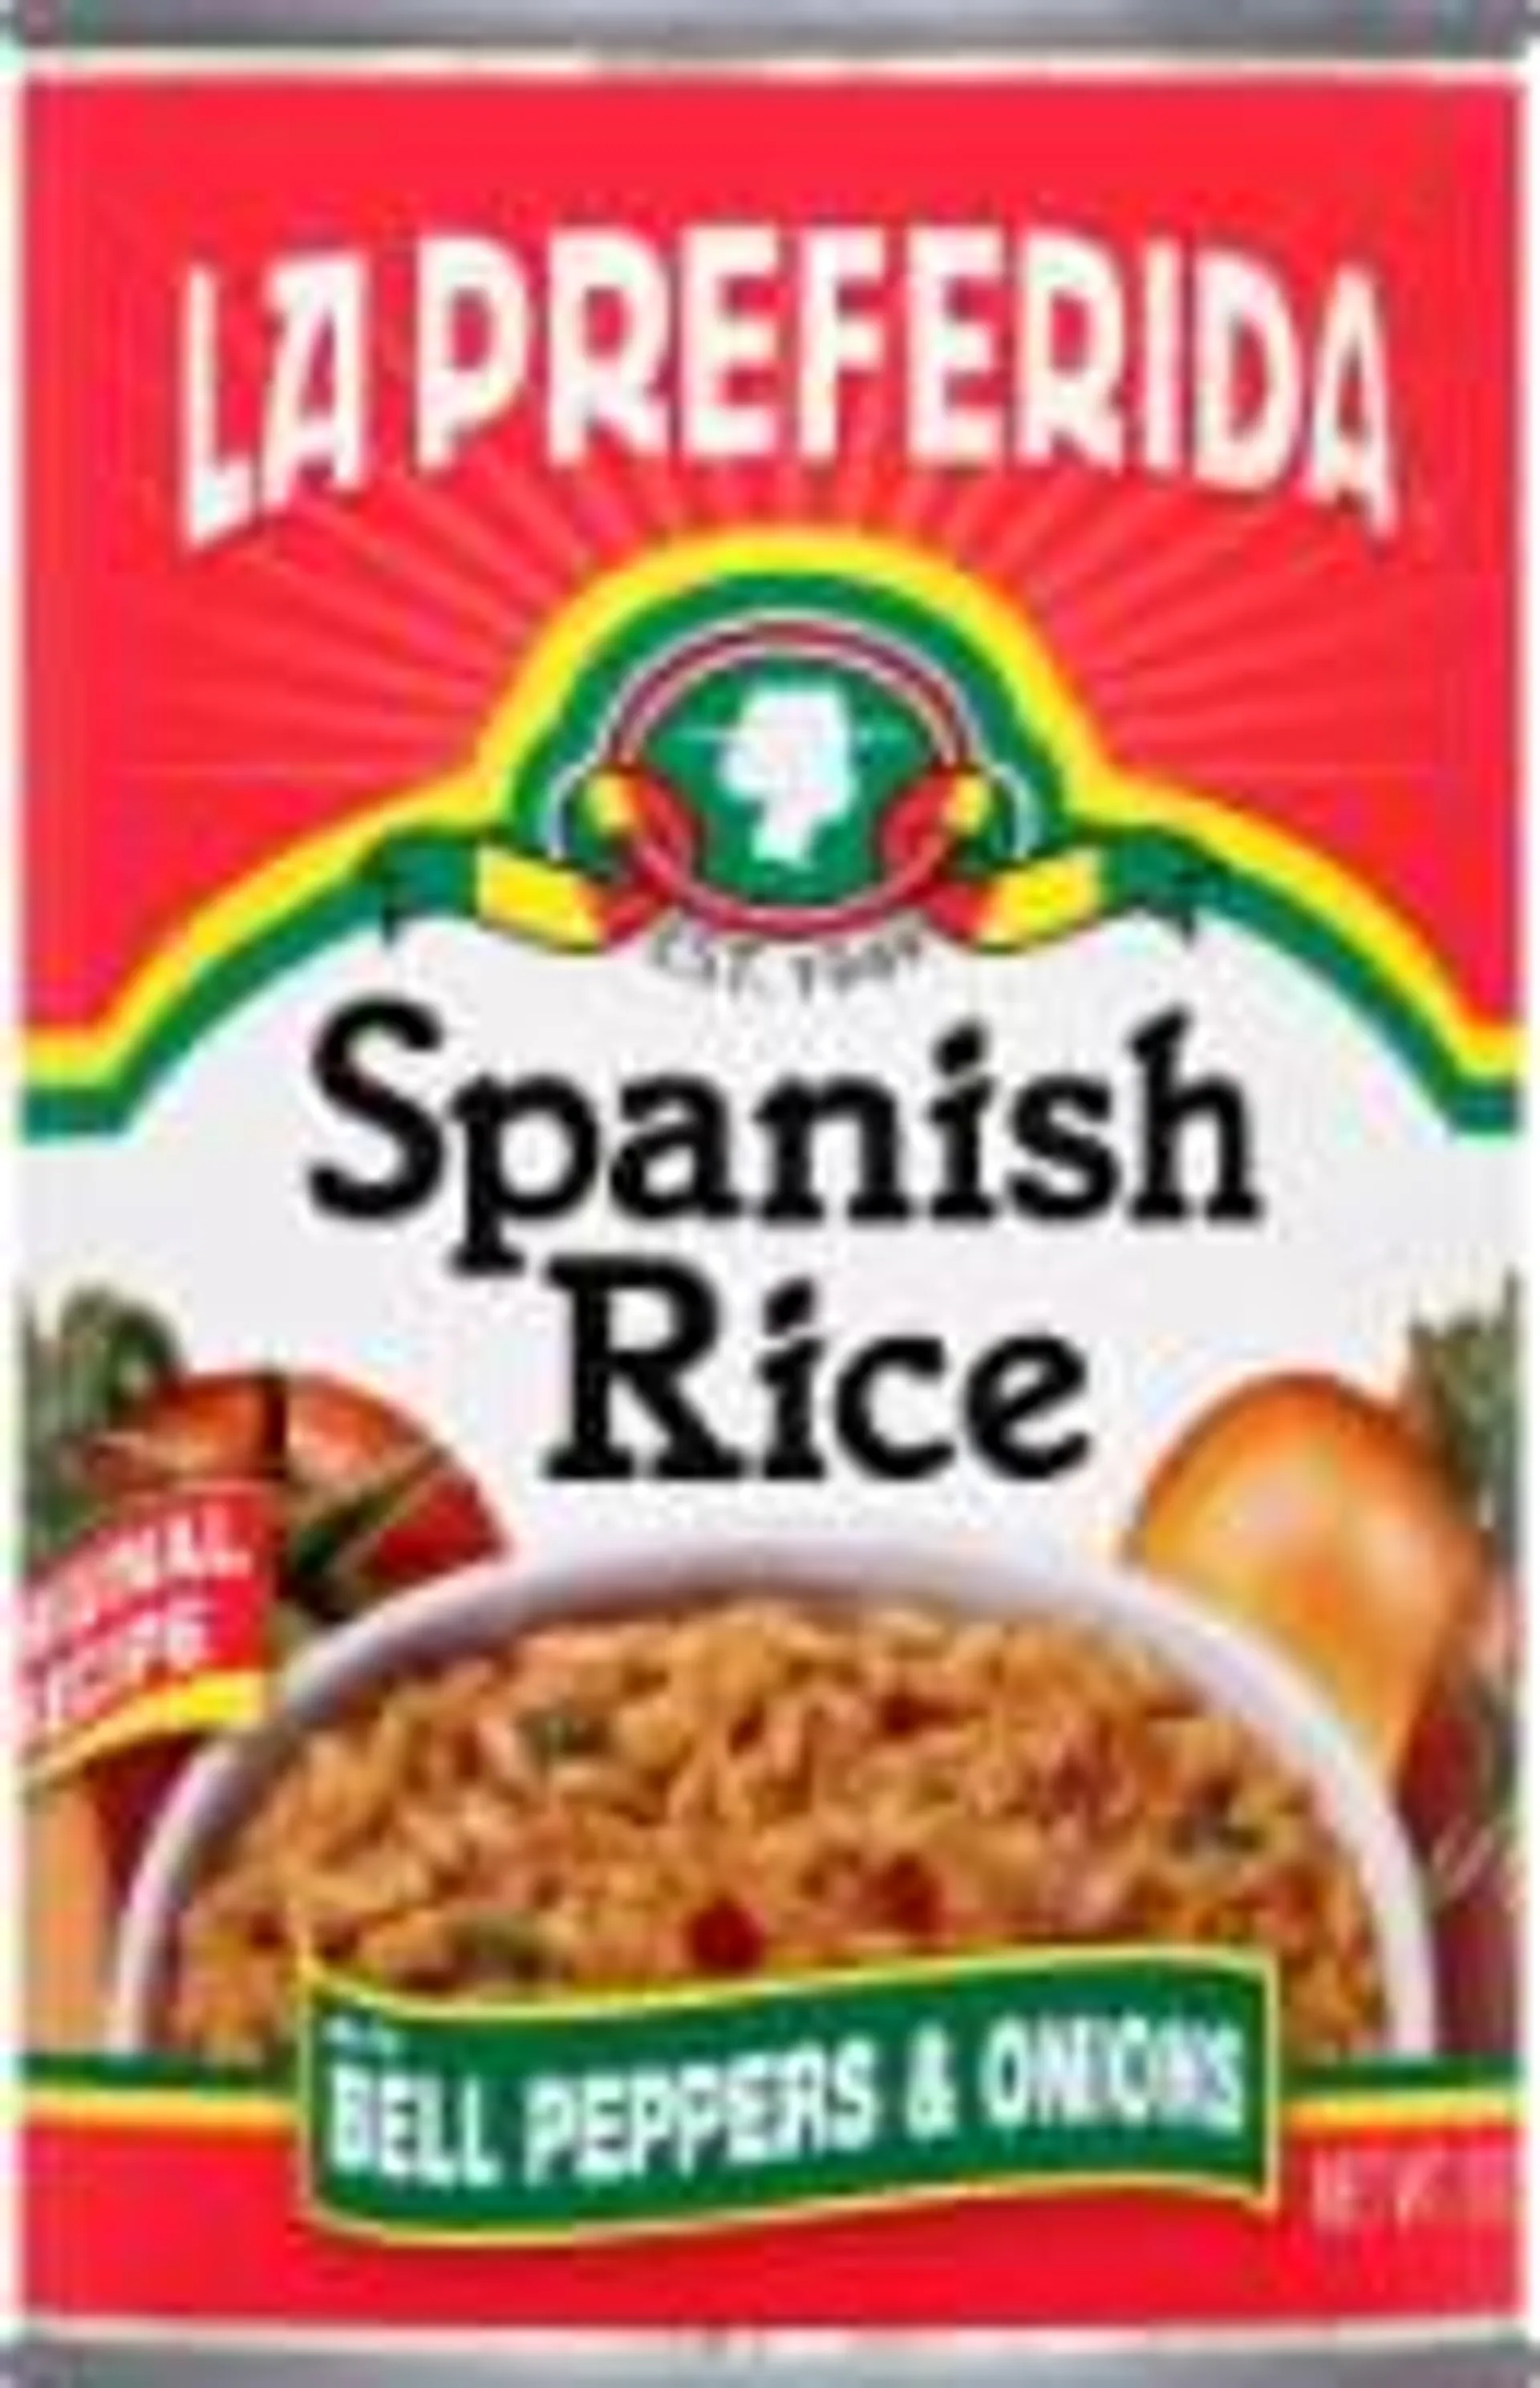 La Preferida® Spanish Rice with Bell Peppers & Onions